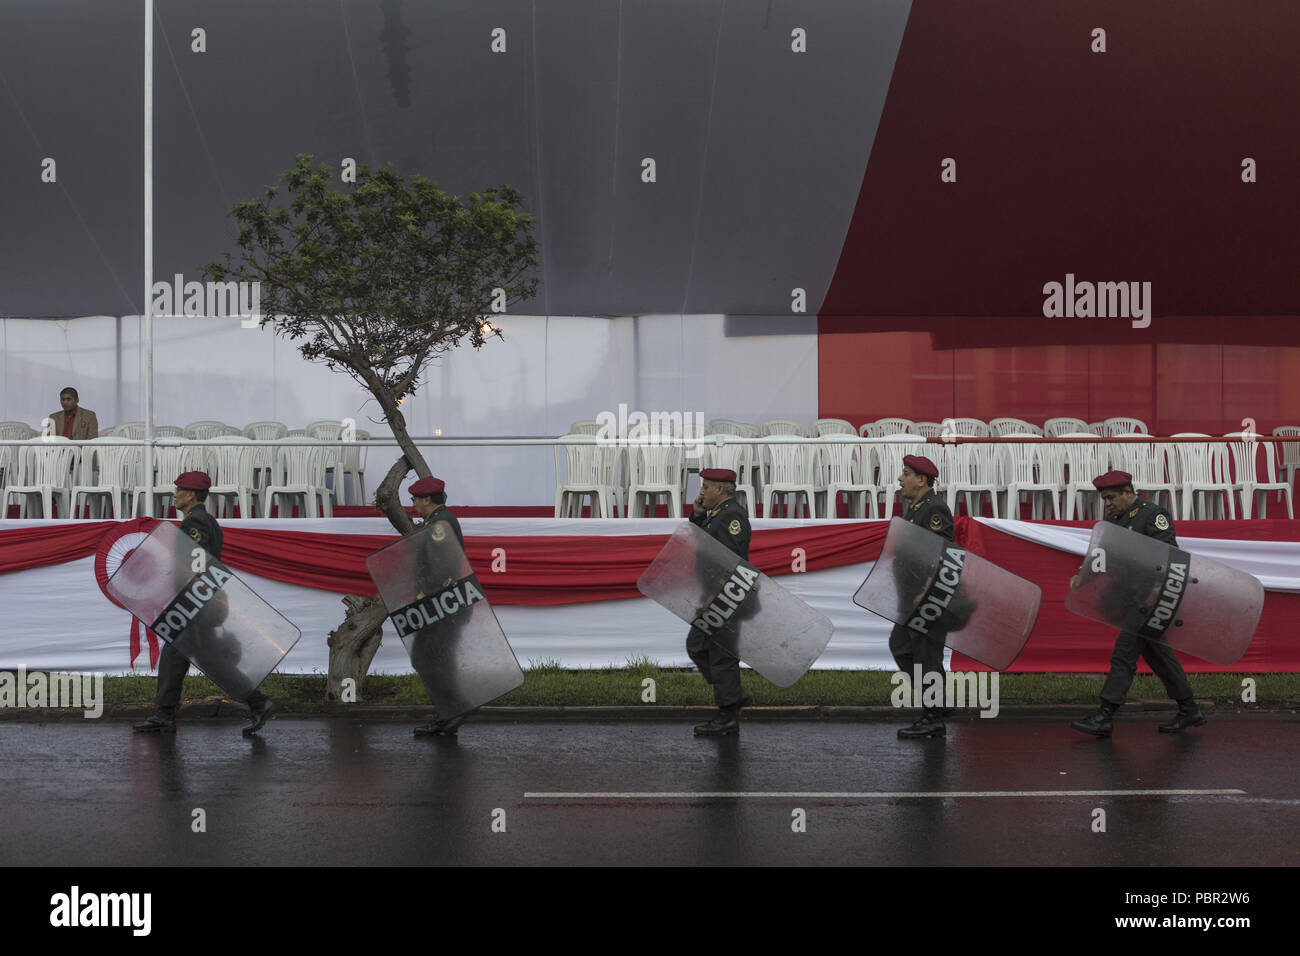 Lima, Lima, Peru. 29th July, 2018. Police officers seen taking posts before the start of the military parade.Members of Peru's armed forces, coastguard, search & rescue, and police march in full uniform during the country's Gran Parada Militar. This parade always occurs the day after Peru's Independence Day marking the official end of festivities across the nation. Credit: Guillermo Gutierrez/SOPA Images/ZUMA Wire/Alamy Live News Stock Photo